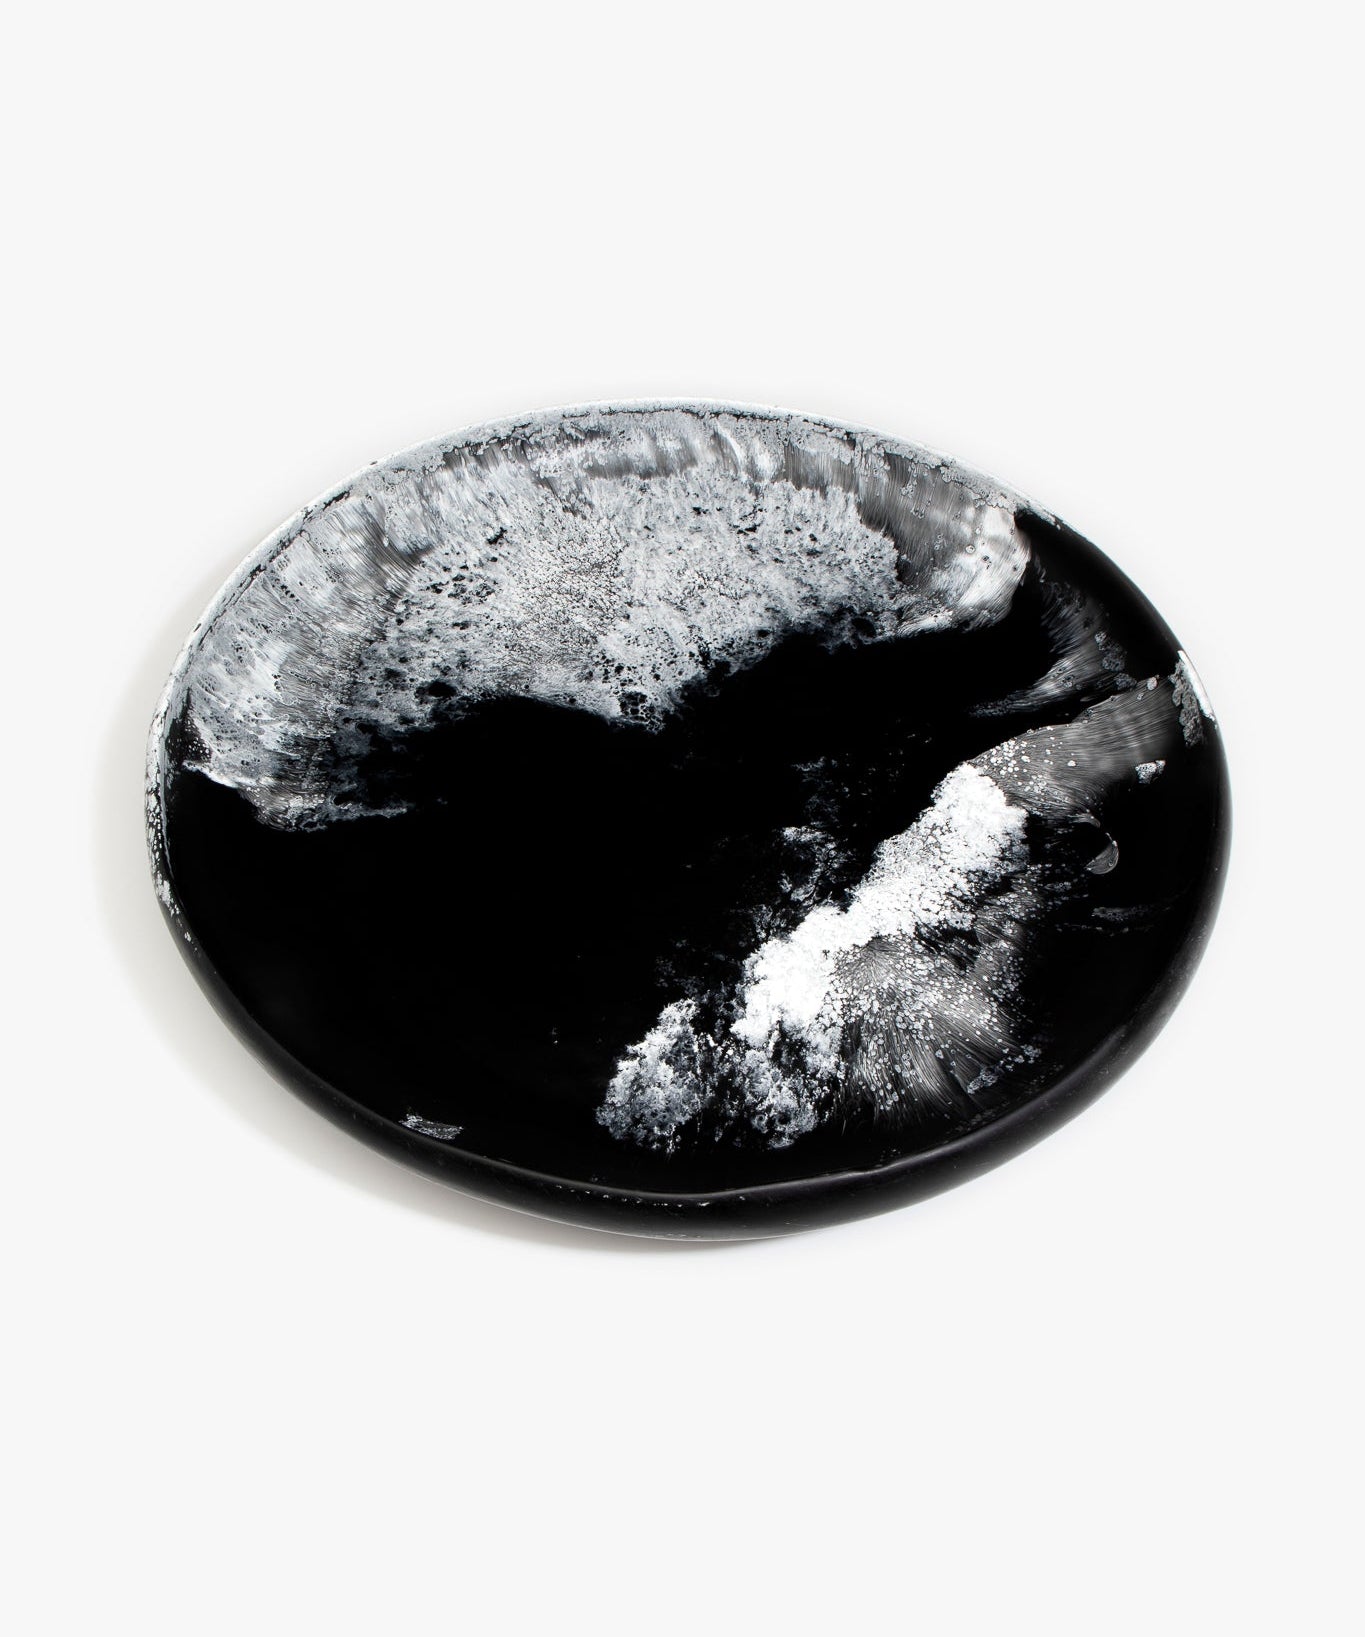 Dinosaur Designs Extra Large Earth Bowl Bowls in Black Marble color resin